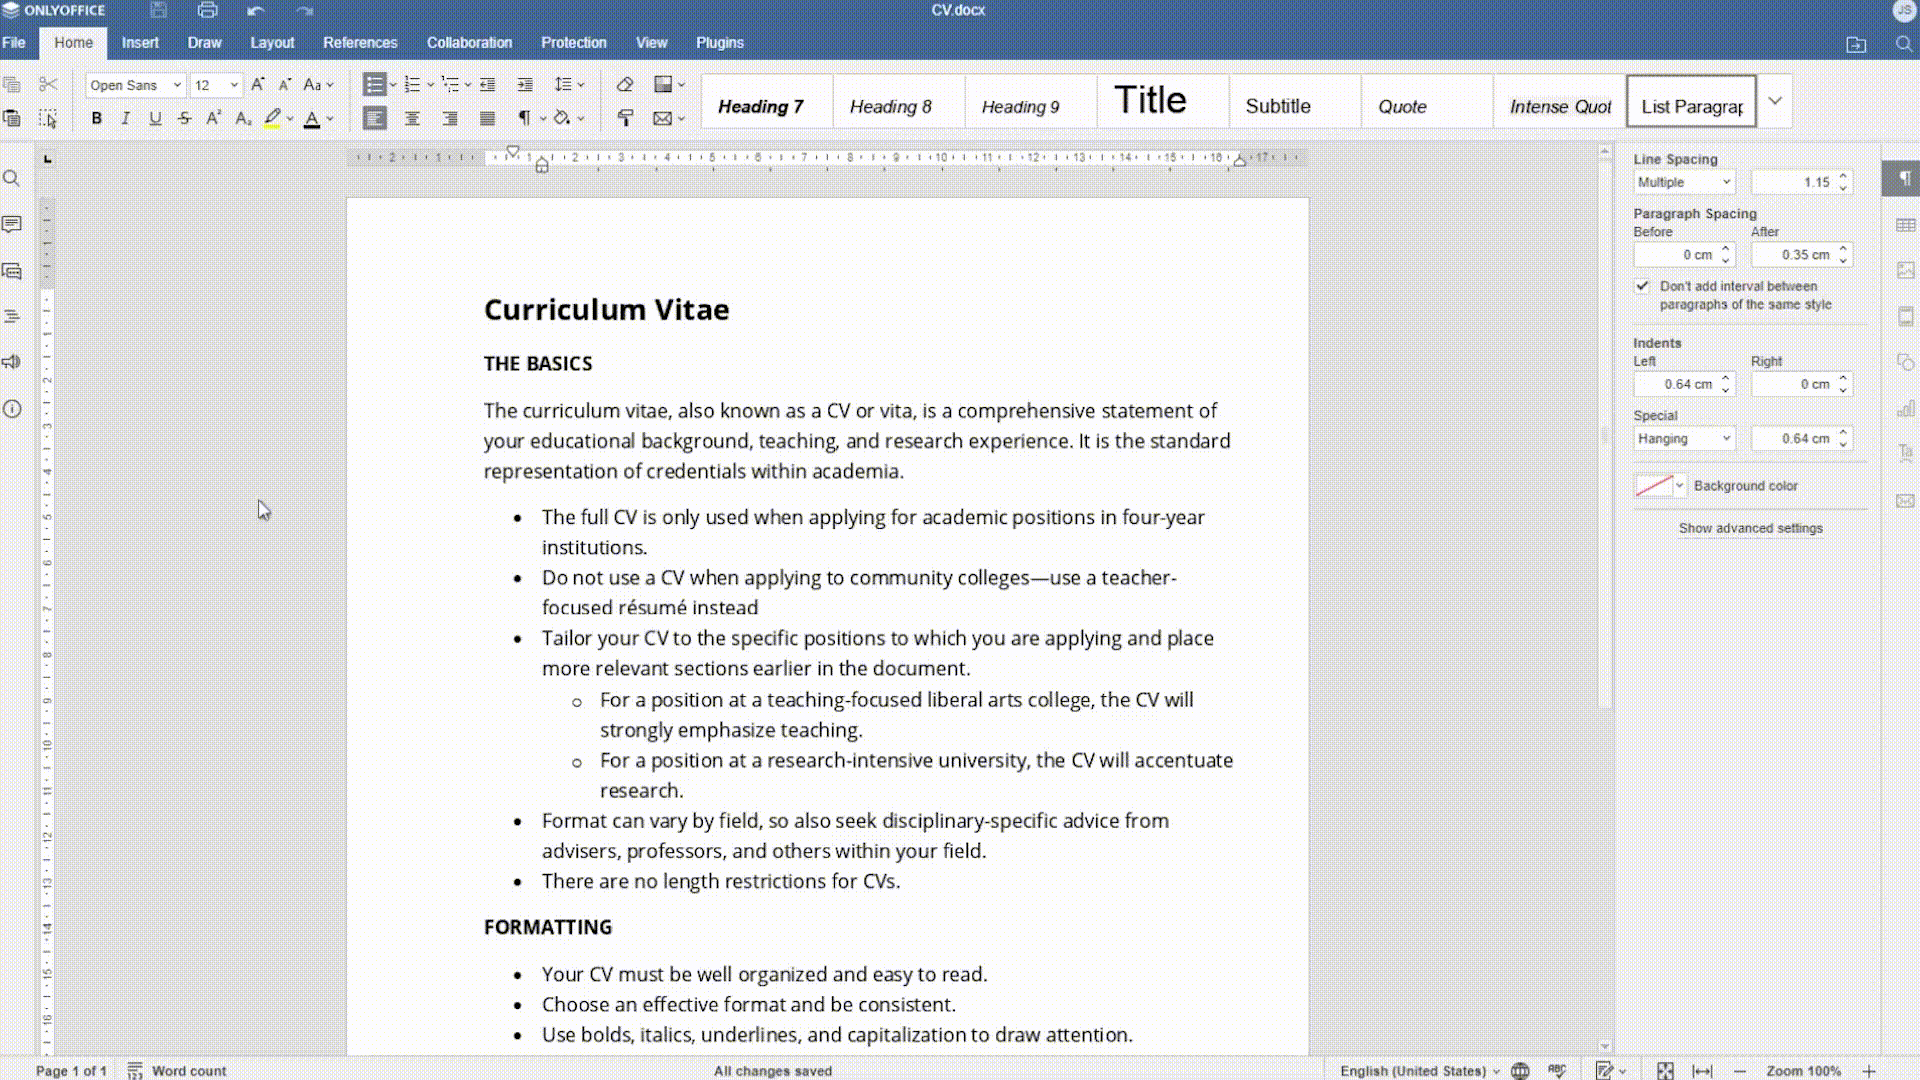 ONLYOFFICE Docs 7.5 released: PDF Editor, automatic hyphenation, Page Breaks and tracer arrows in sheets, Screen Readers, and more